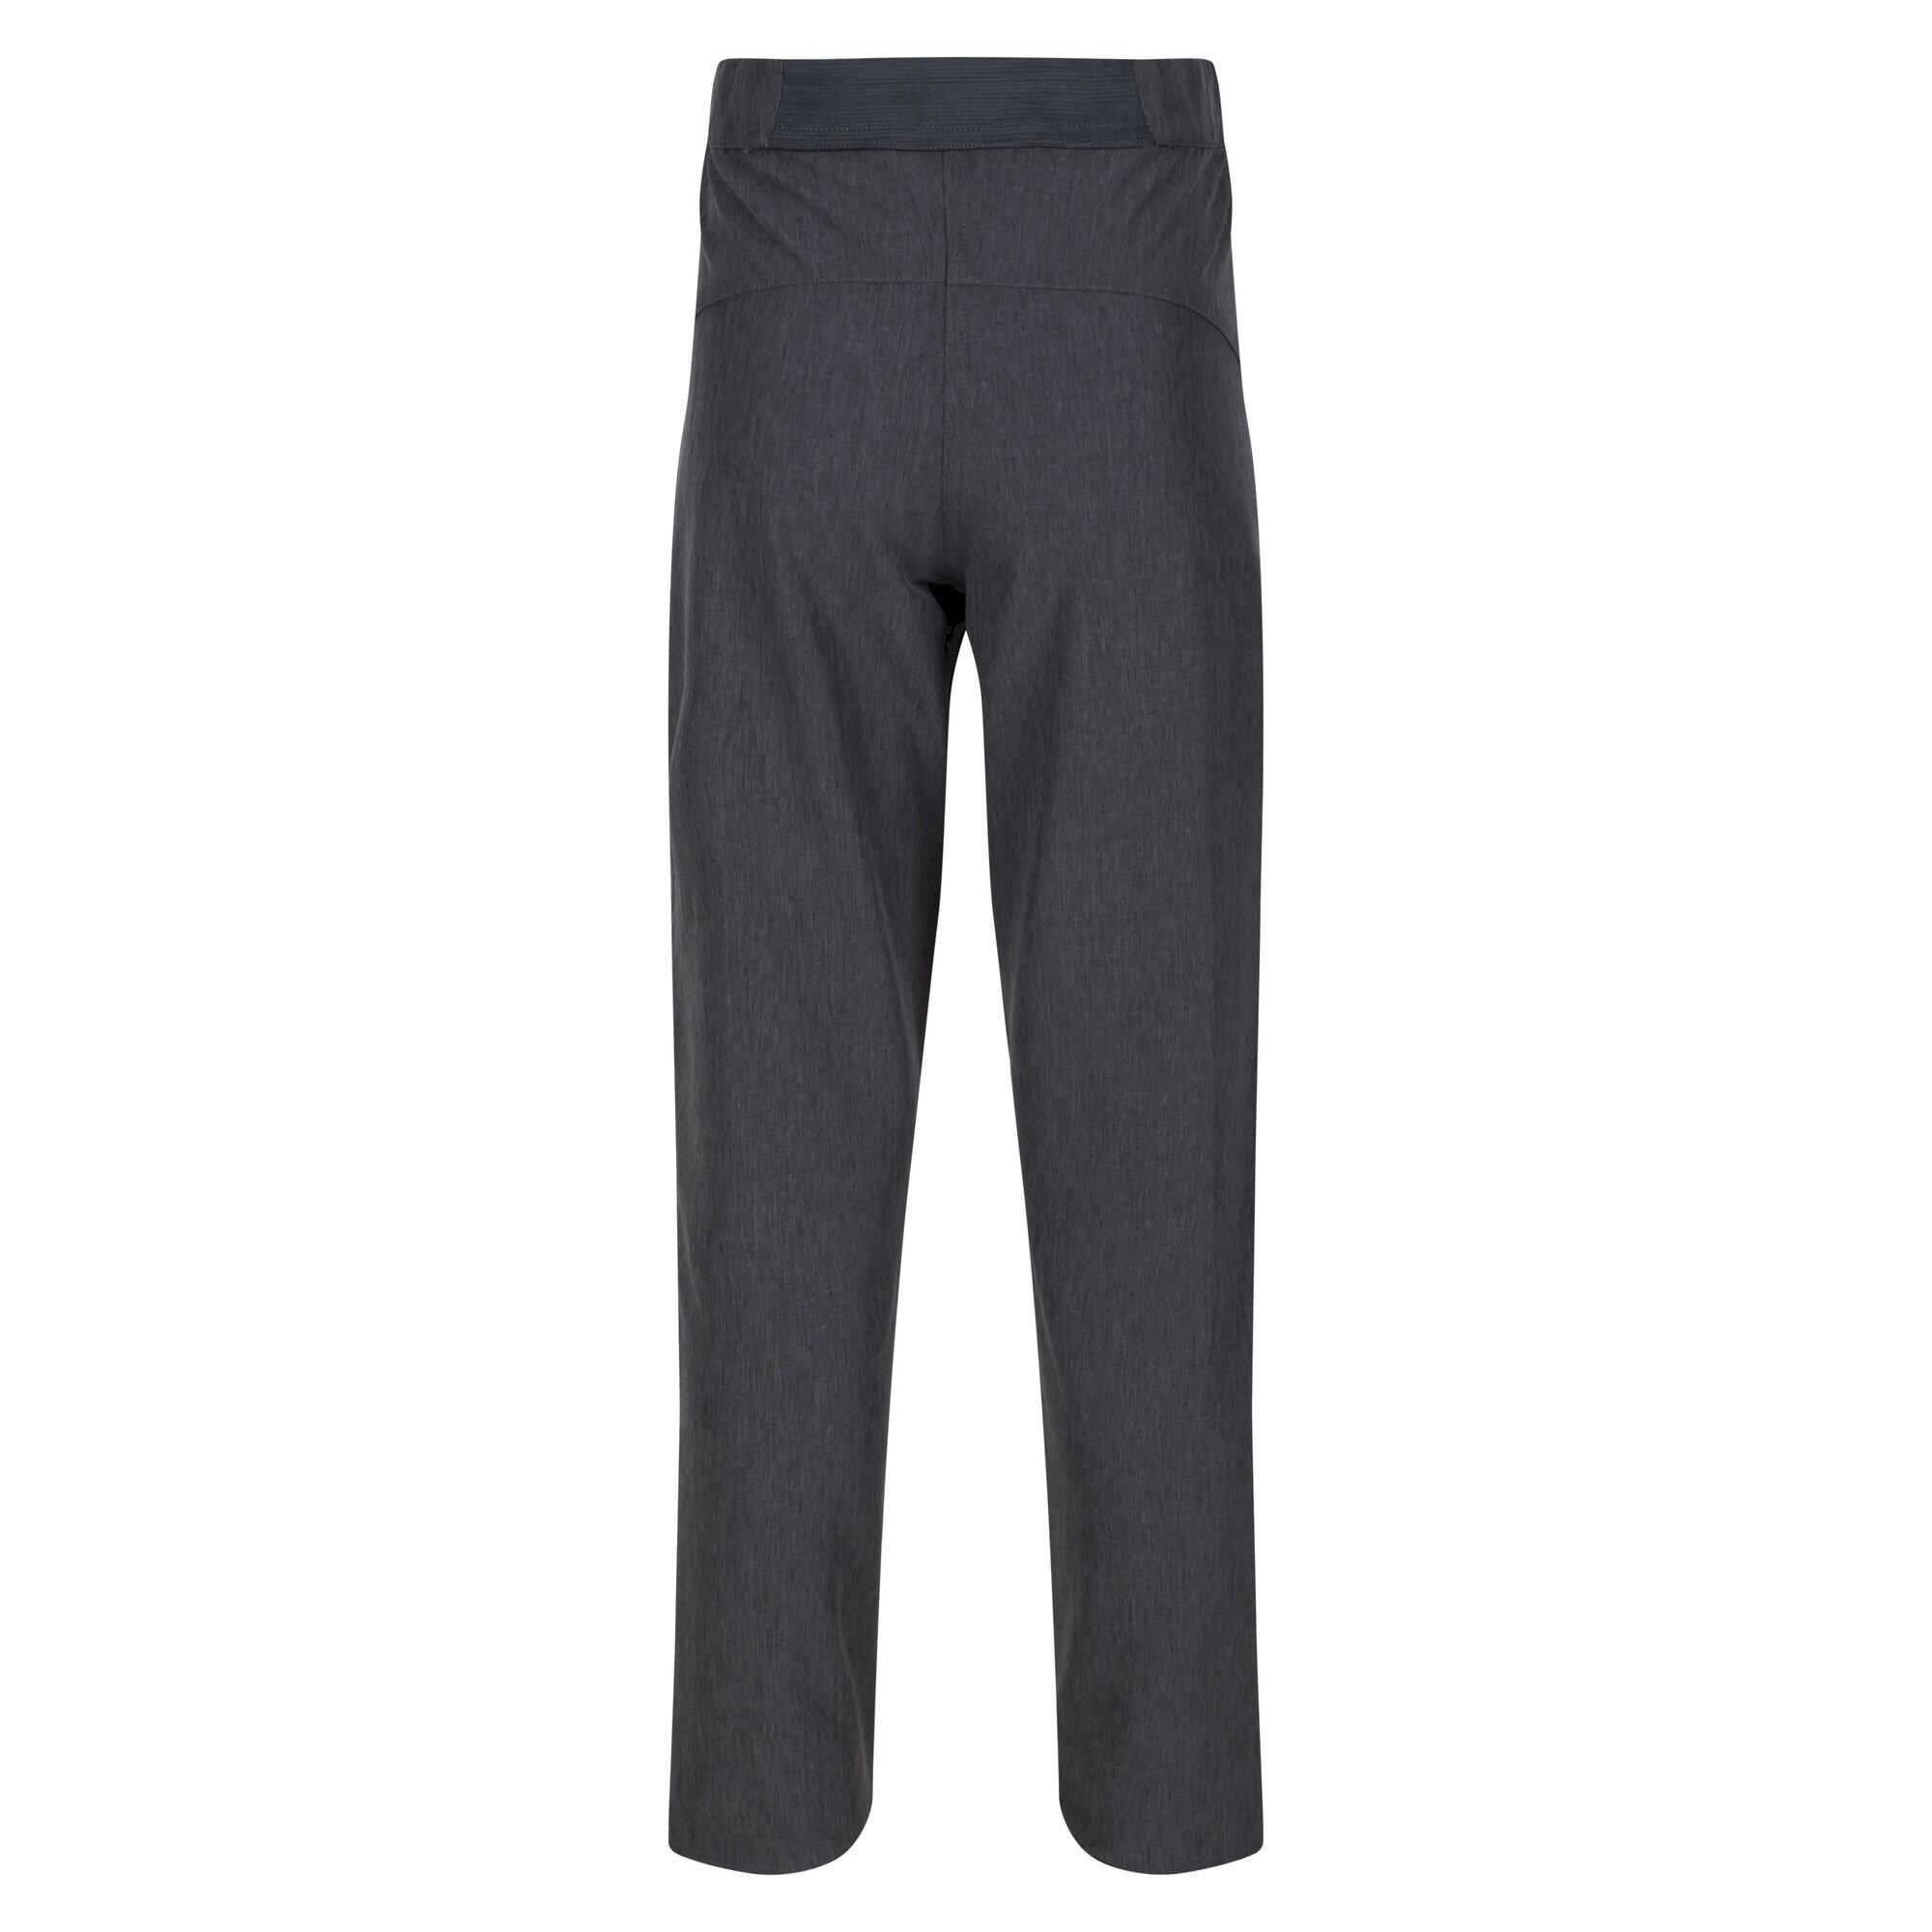 Childrens/Kids Pentre Marl Stretch Trousers (Seal Grey) 2/5